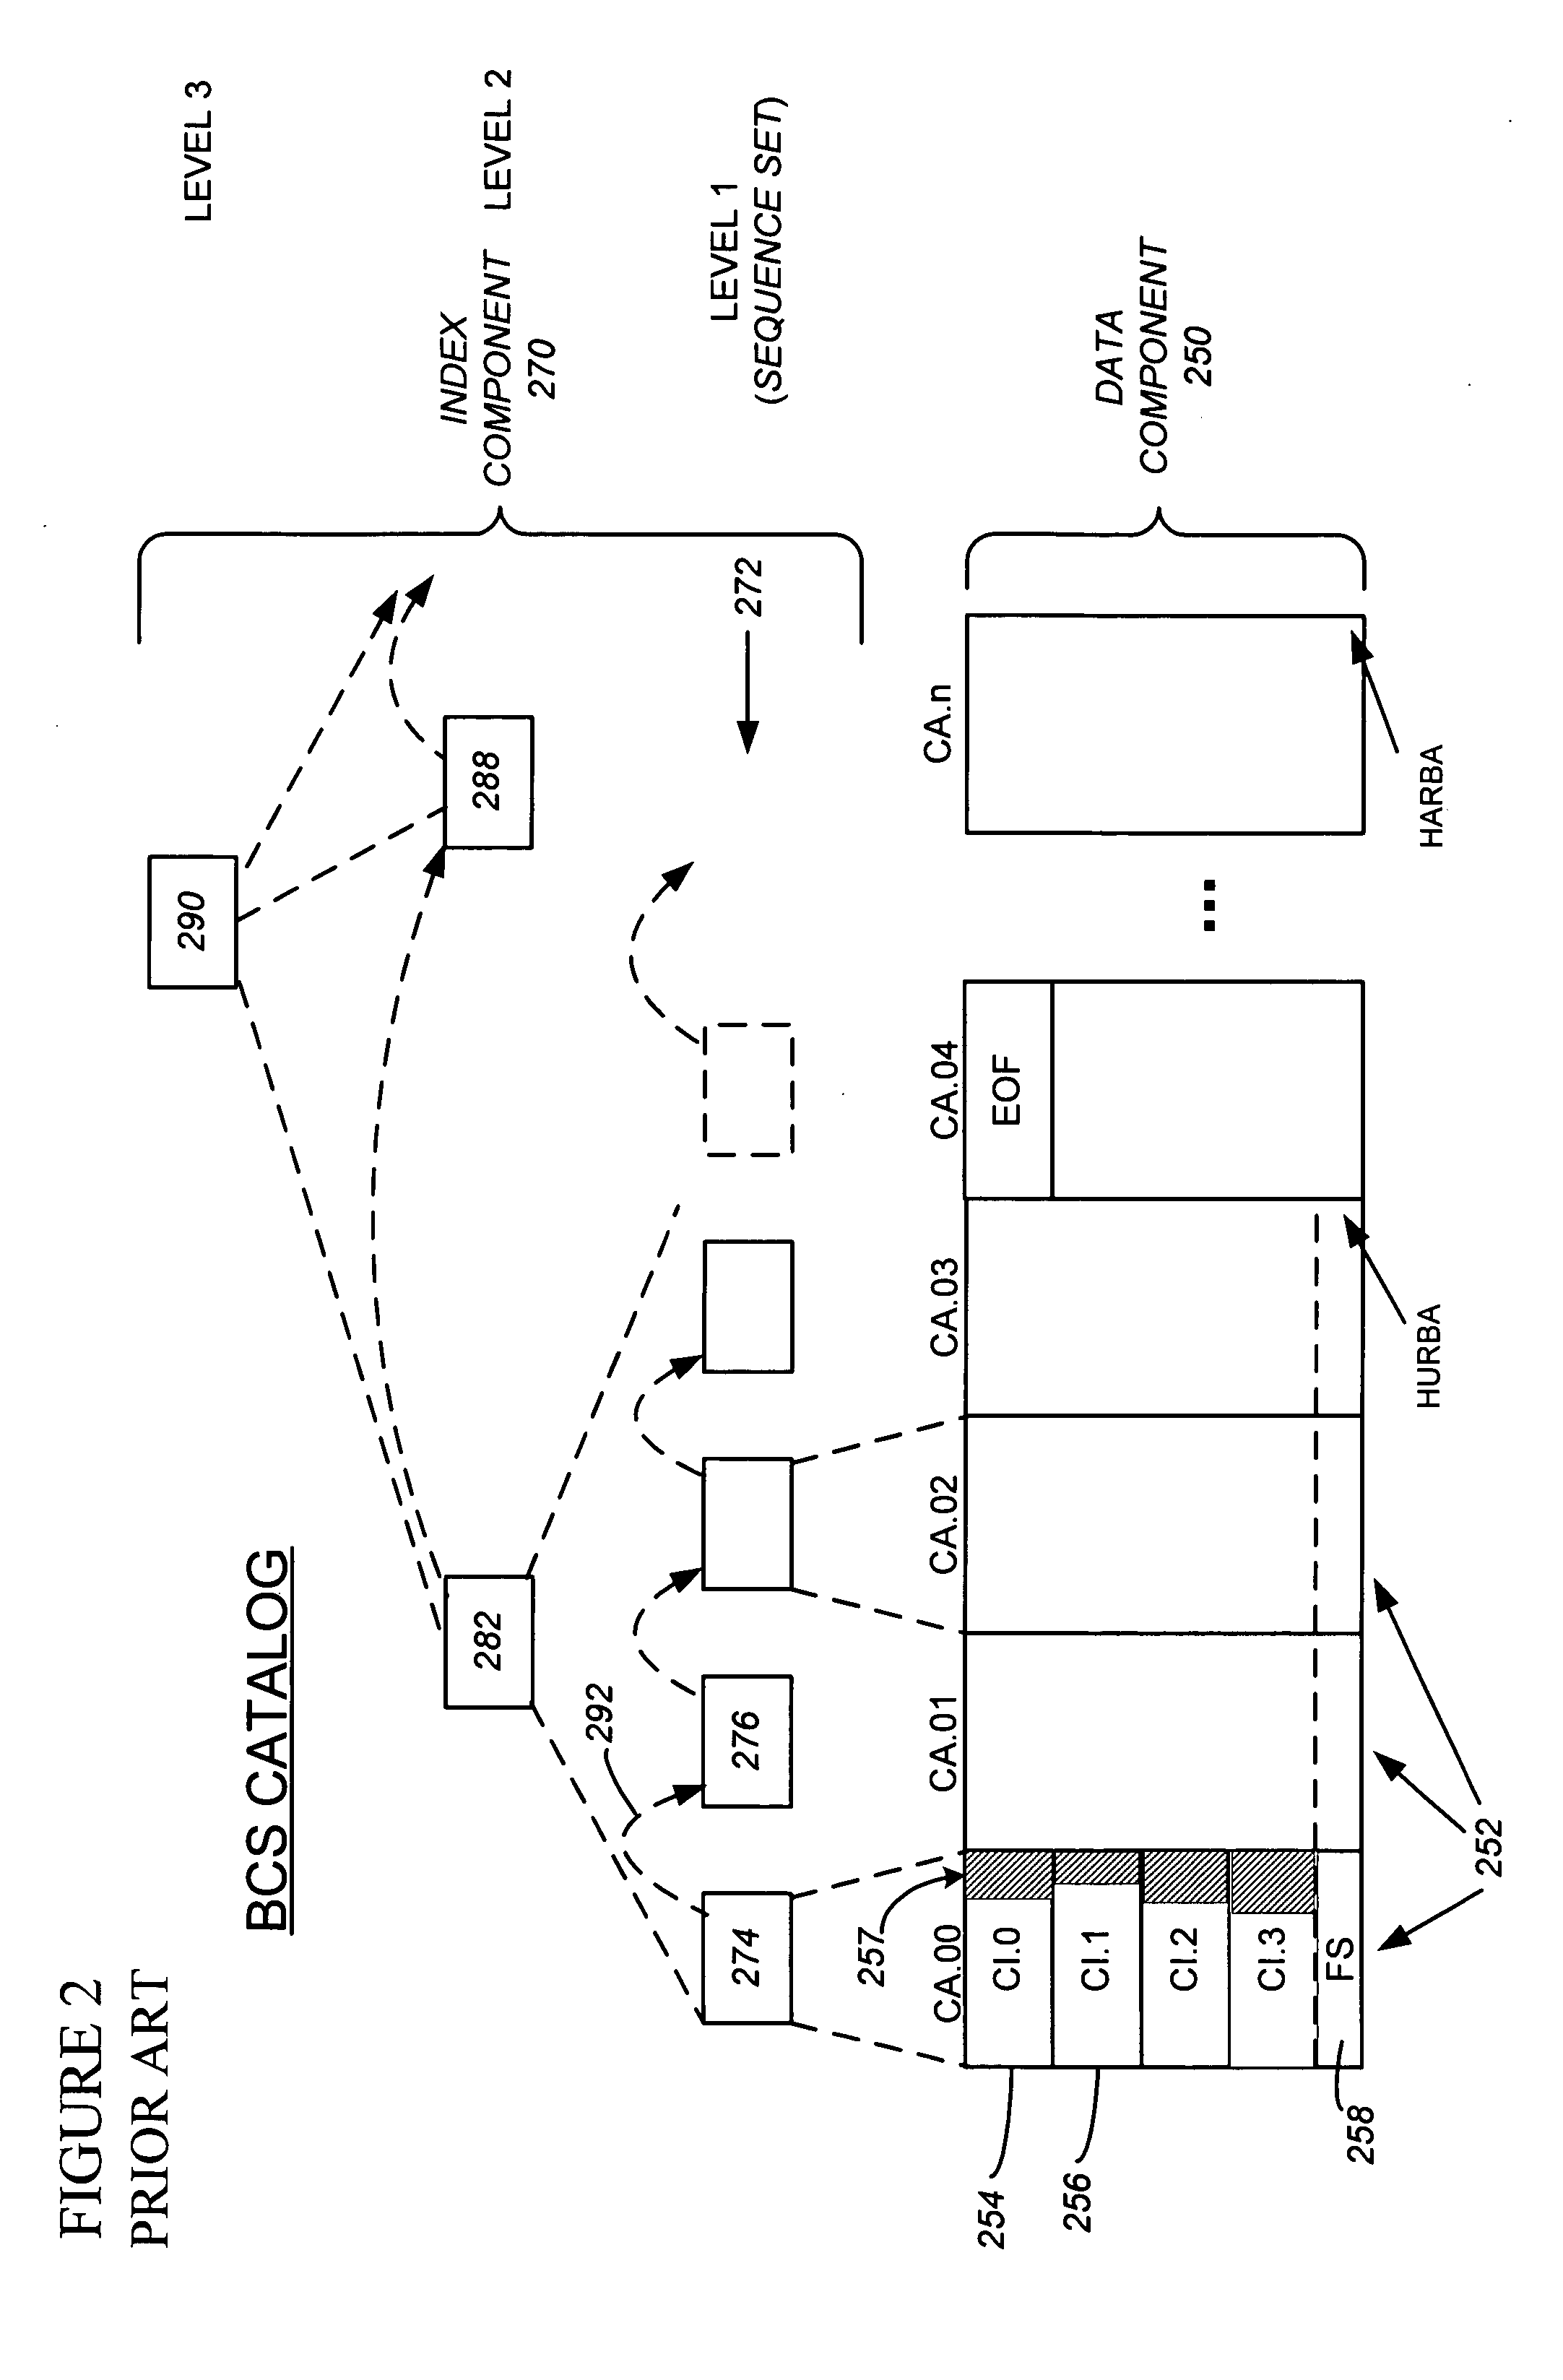 Reorganization and repair of an ICF catalog while open and in-use in a digital data storage system